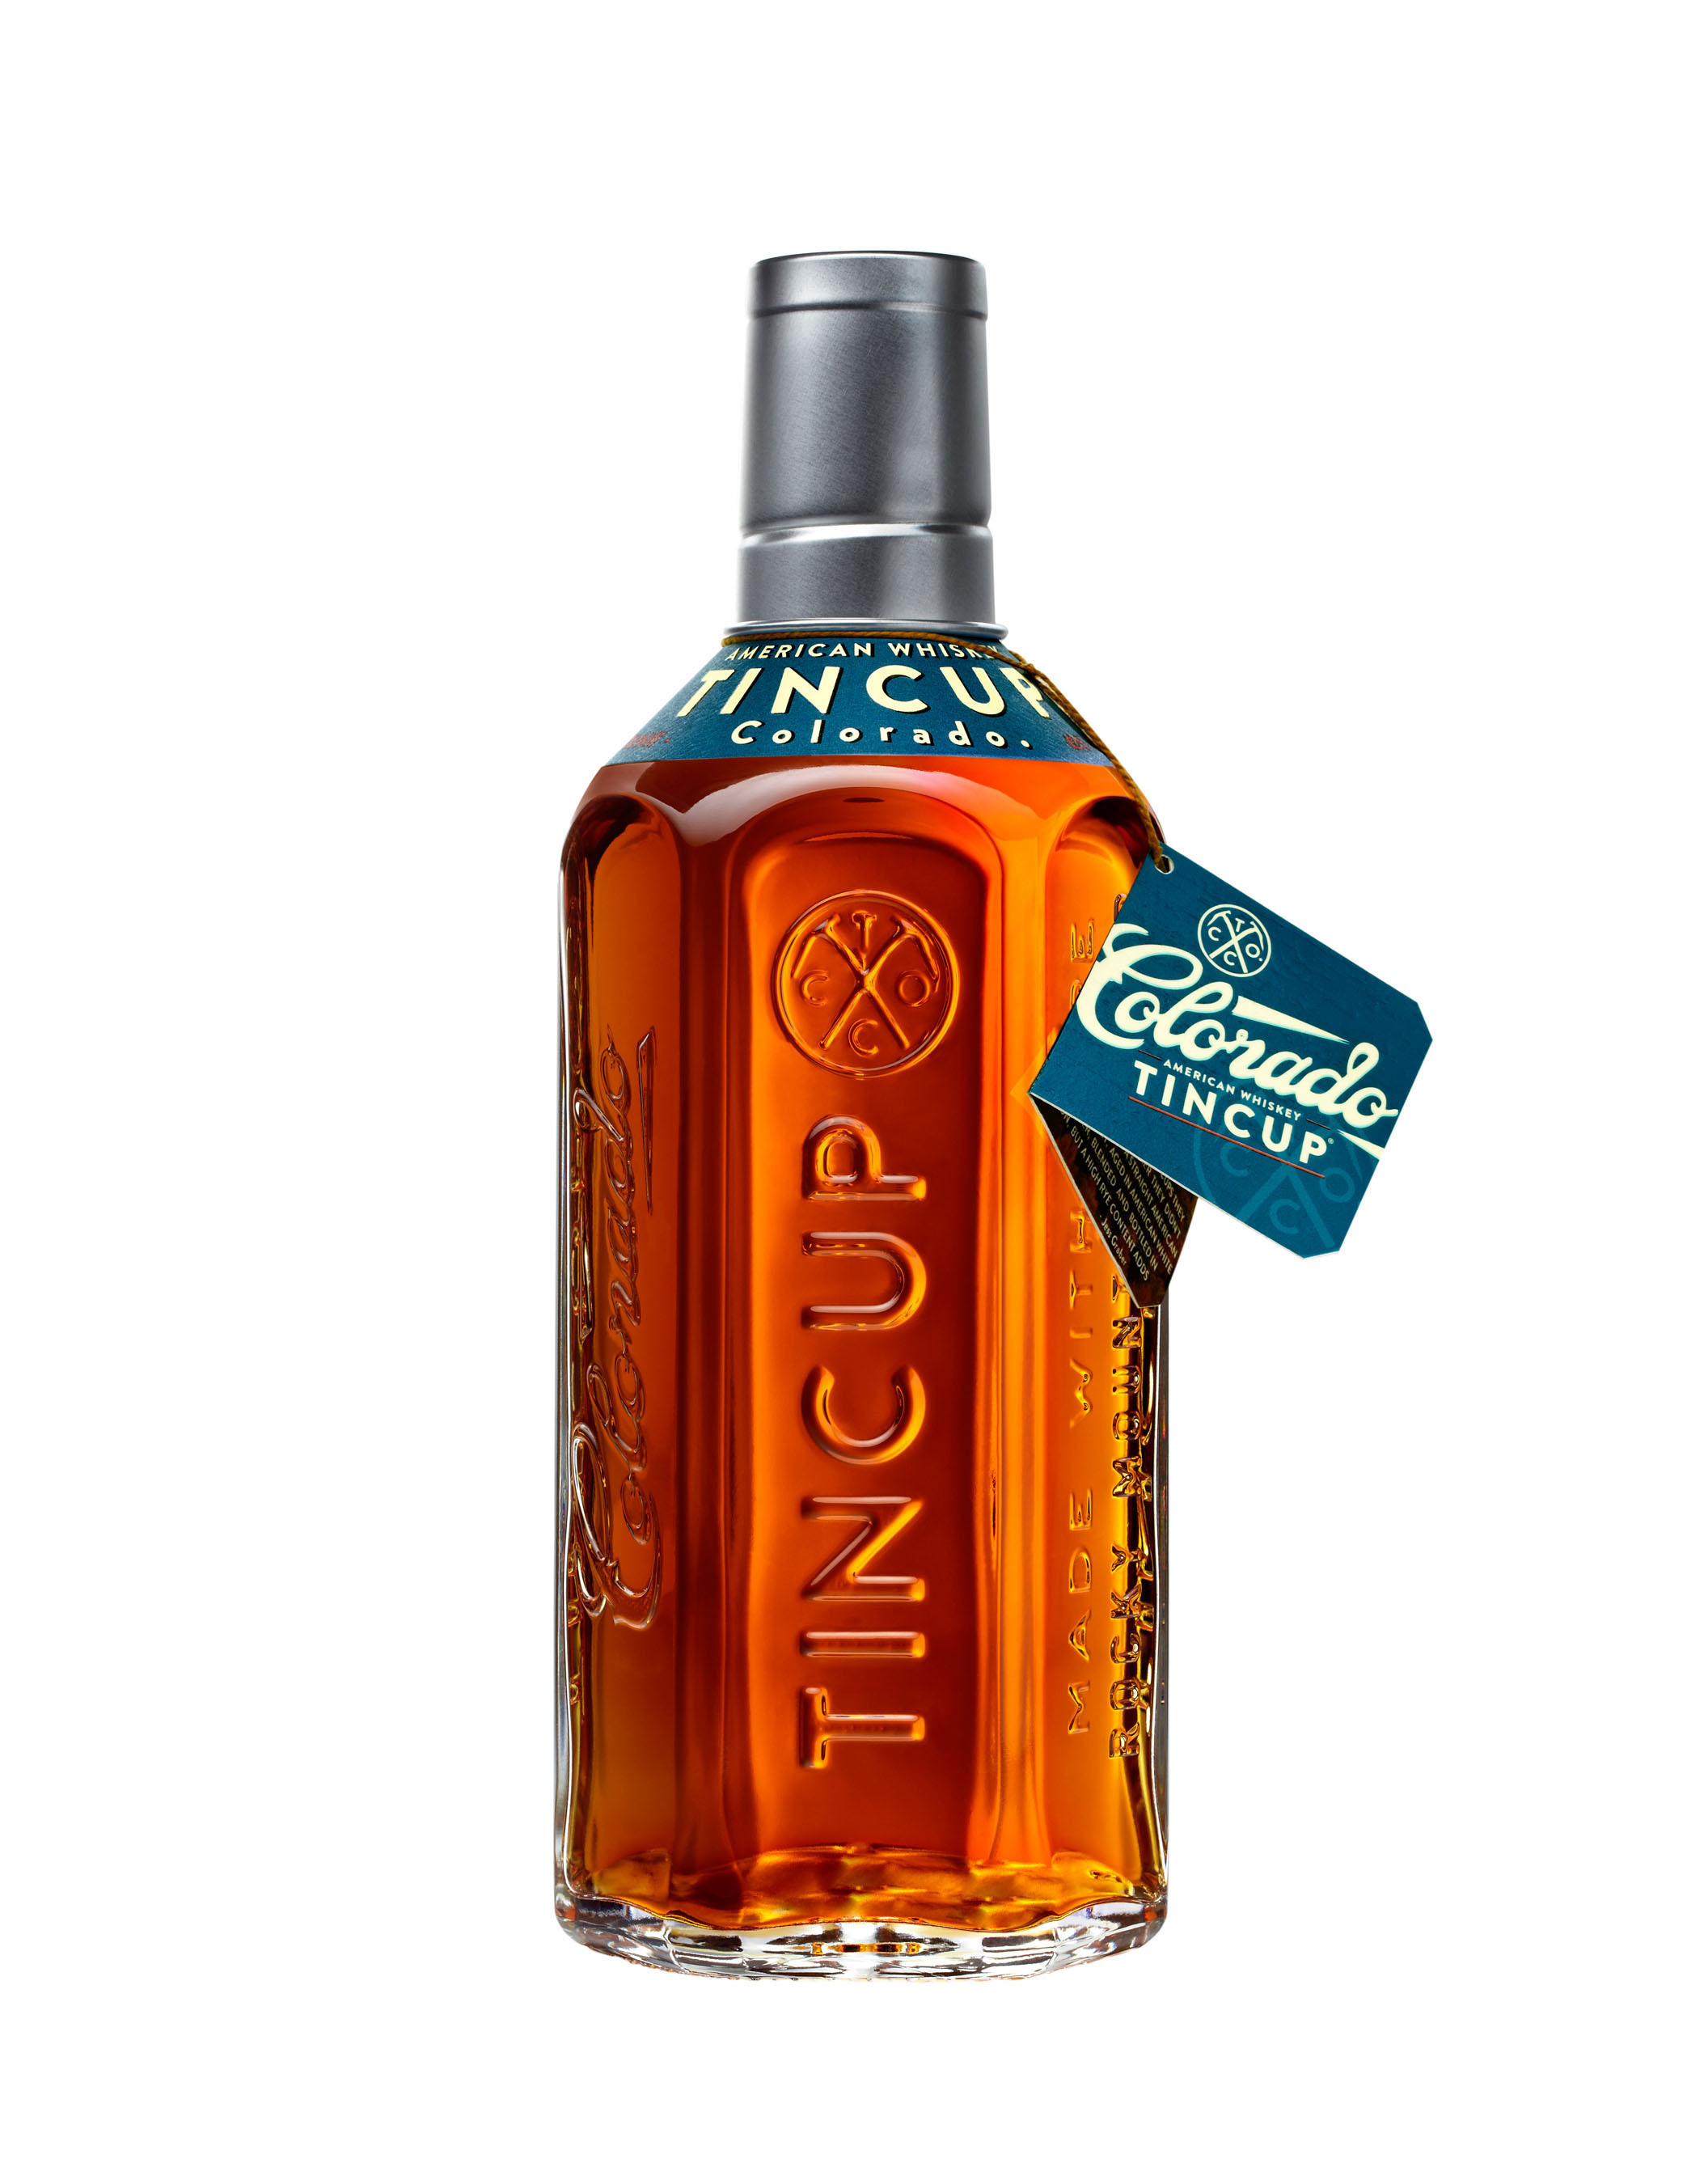 Introducing TINCUP American Whiskey, a Rugged, Rocky Mountain Take on Whiskey from Jess Graber, Offering Bourbon Lovers a Bolder, Spicier Option. (PRNewsFoto/Proximo) (PRNewsFoto/PROXIMO)